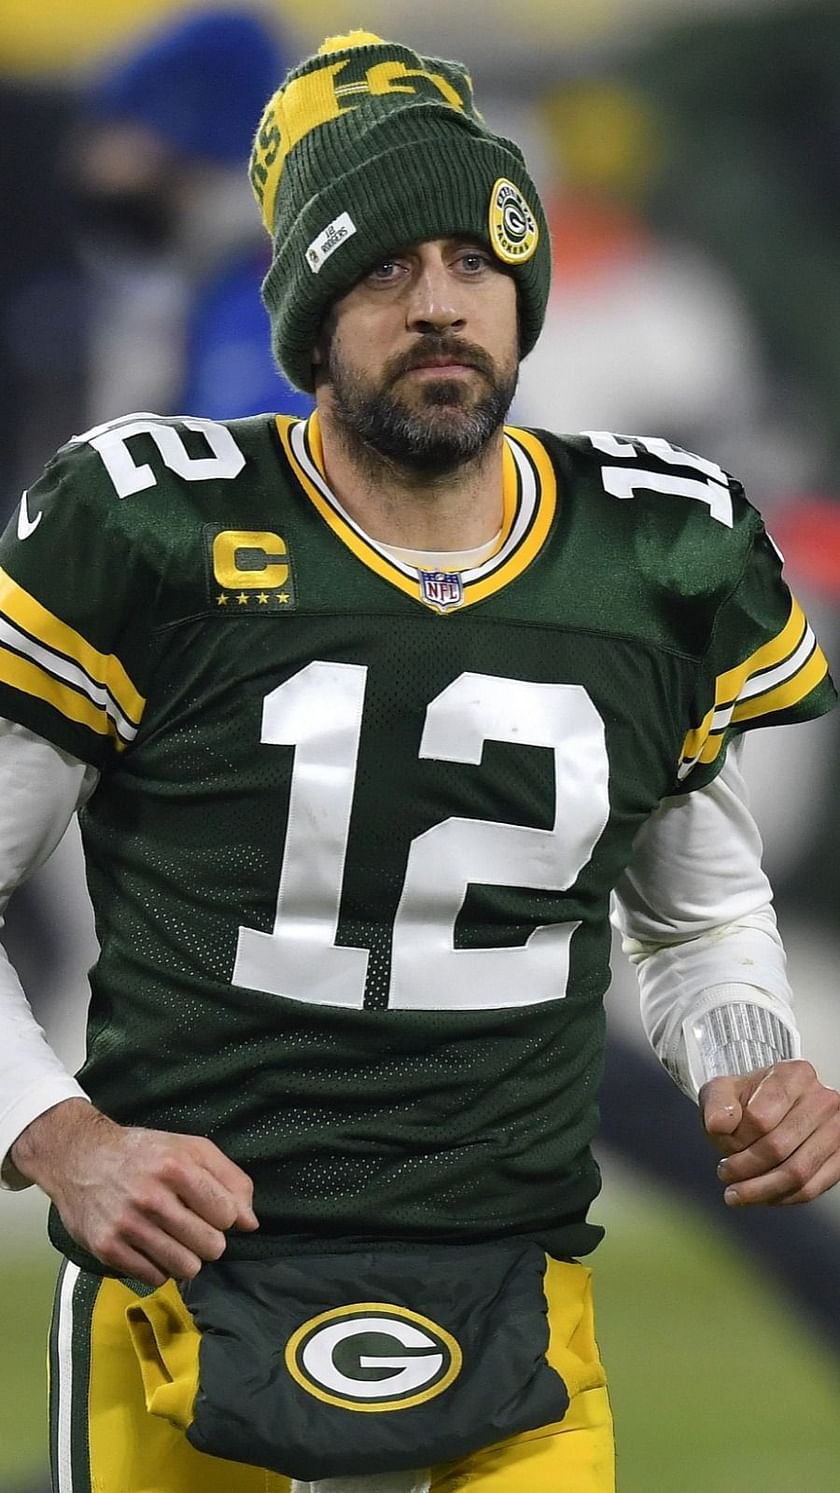 4 NFL players to have more touchdowns than Aaron Rodgers